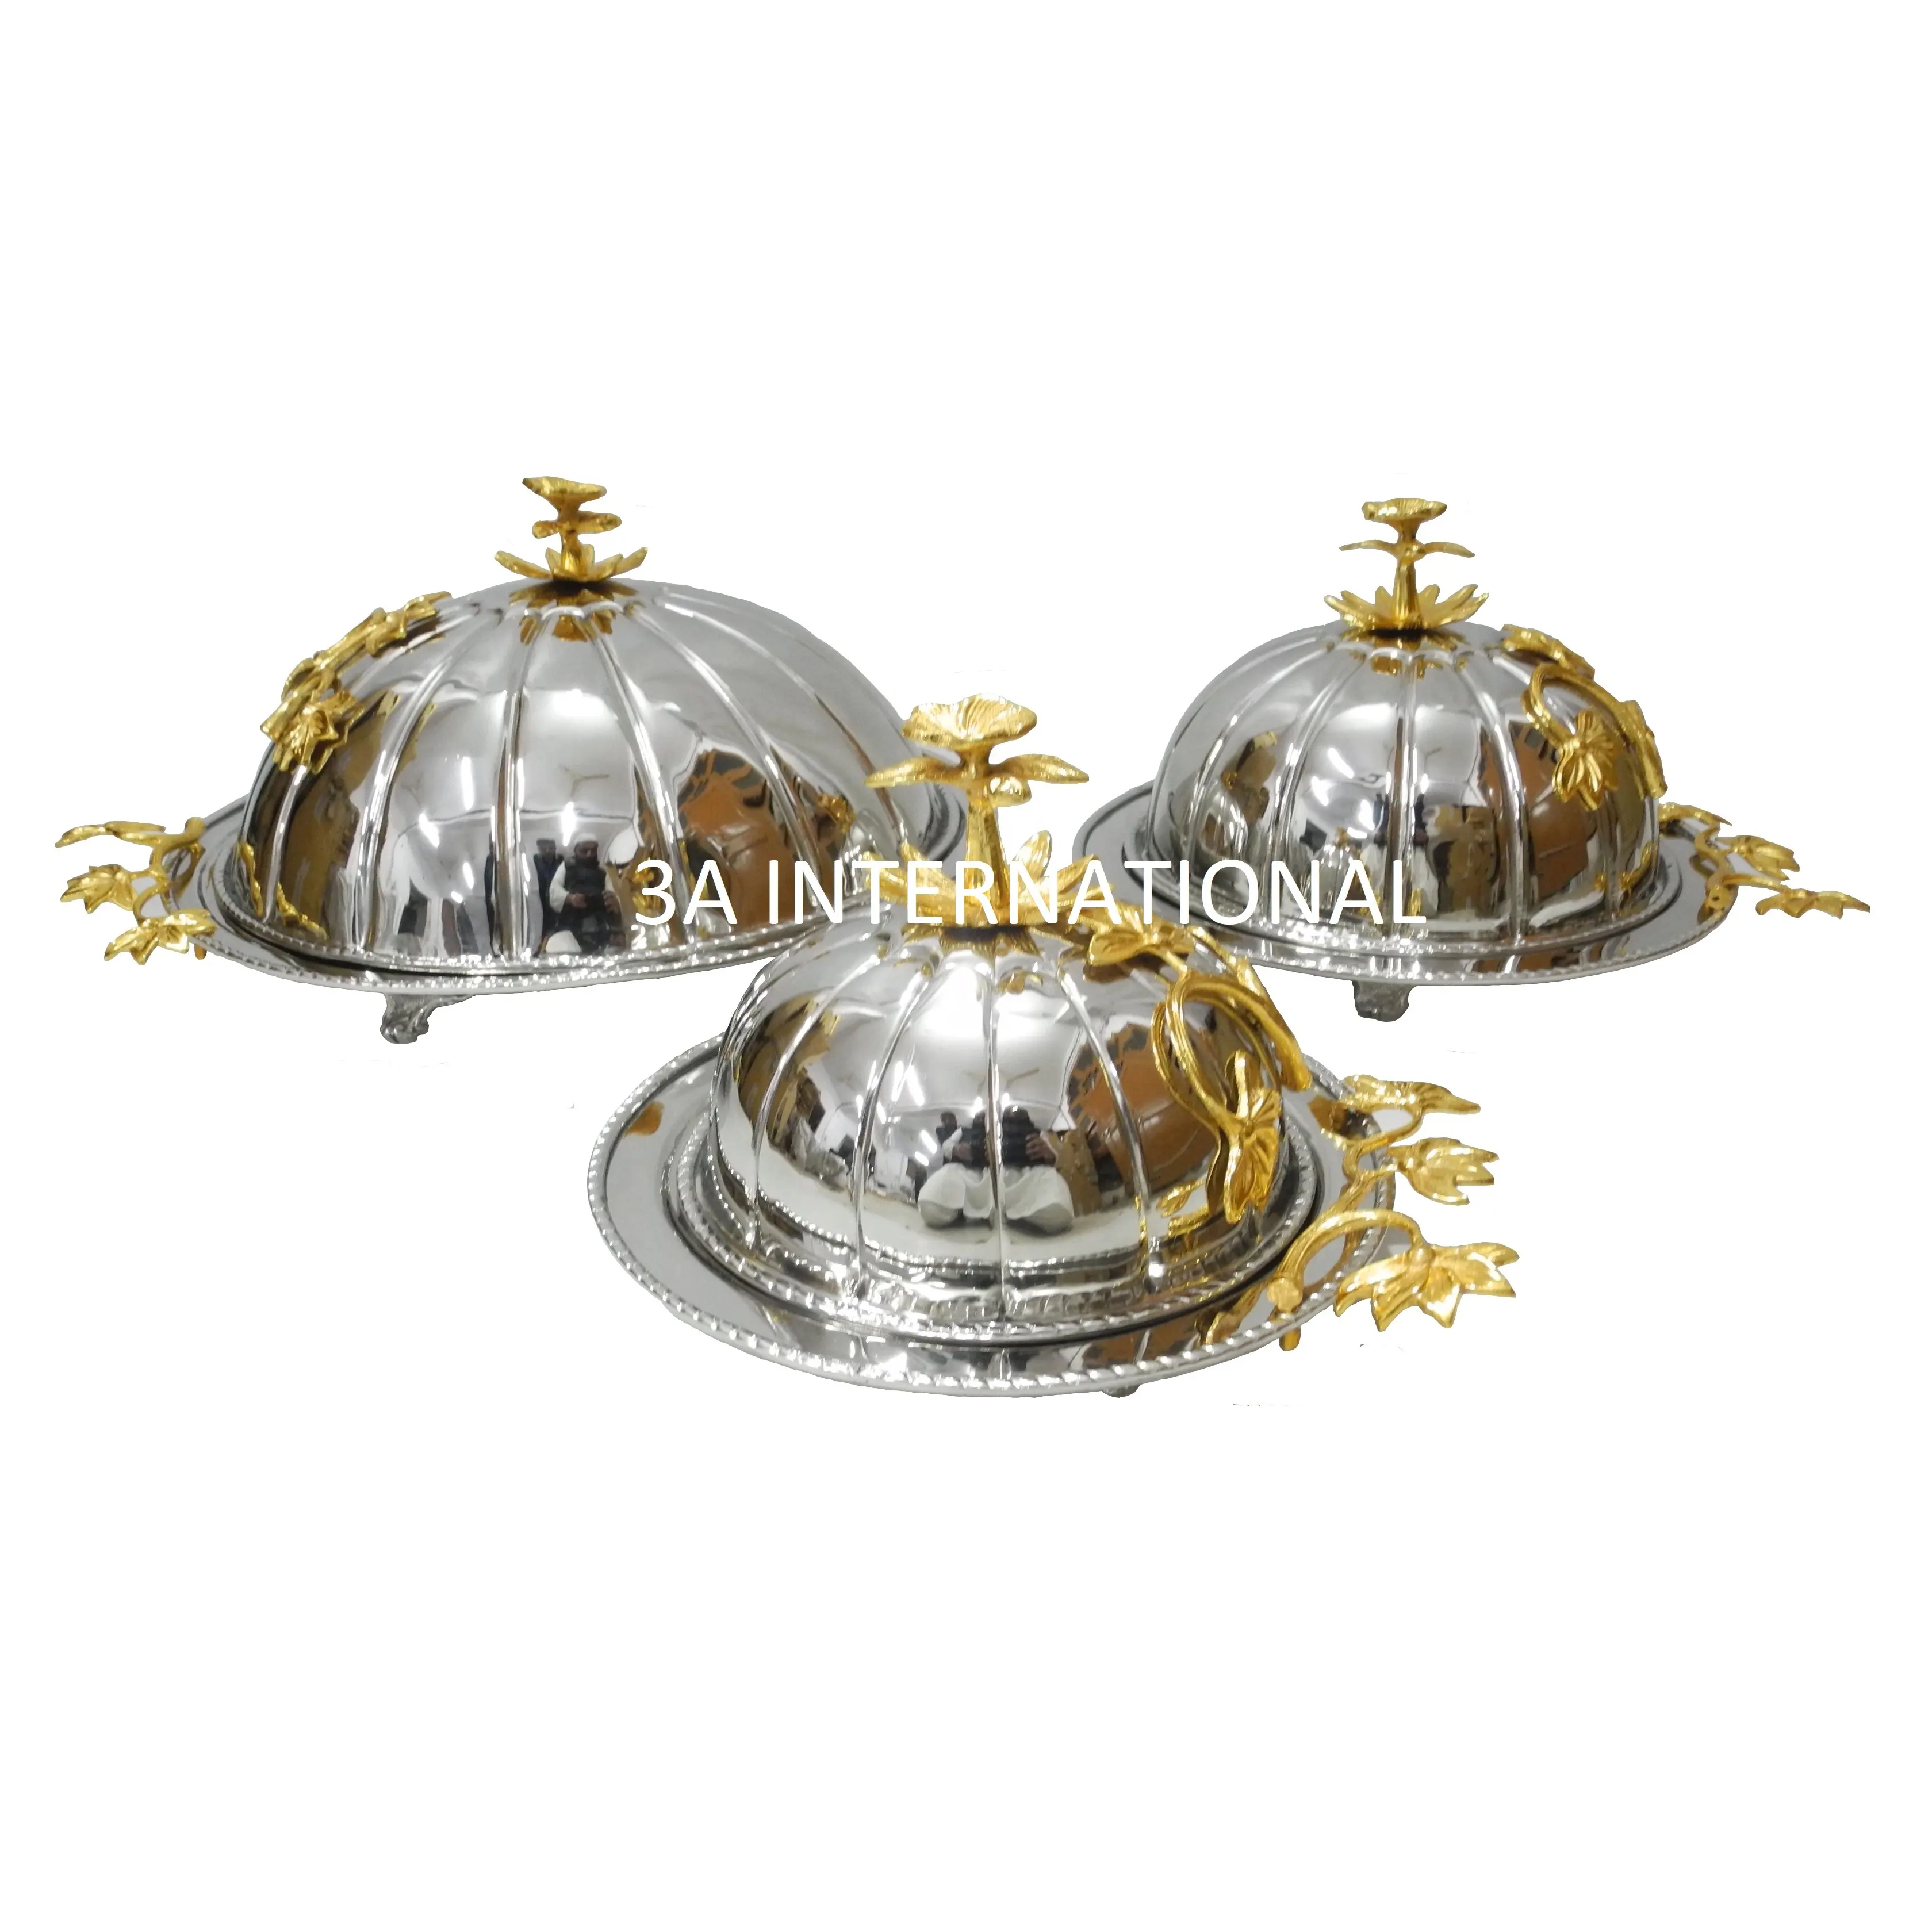 Chafing Hot Sales Silver Plated Food Warmer Buffet Serving Dish Set of Three Chafing Dishes For Sale For Wholesale Price